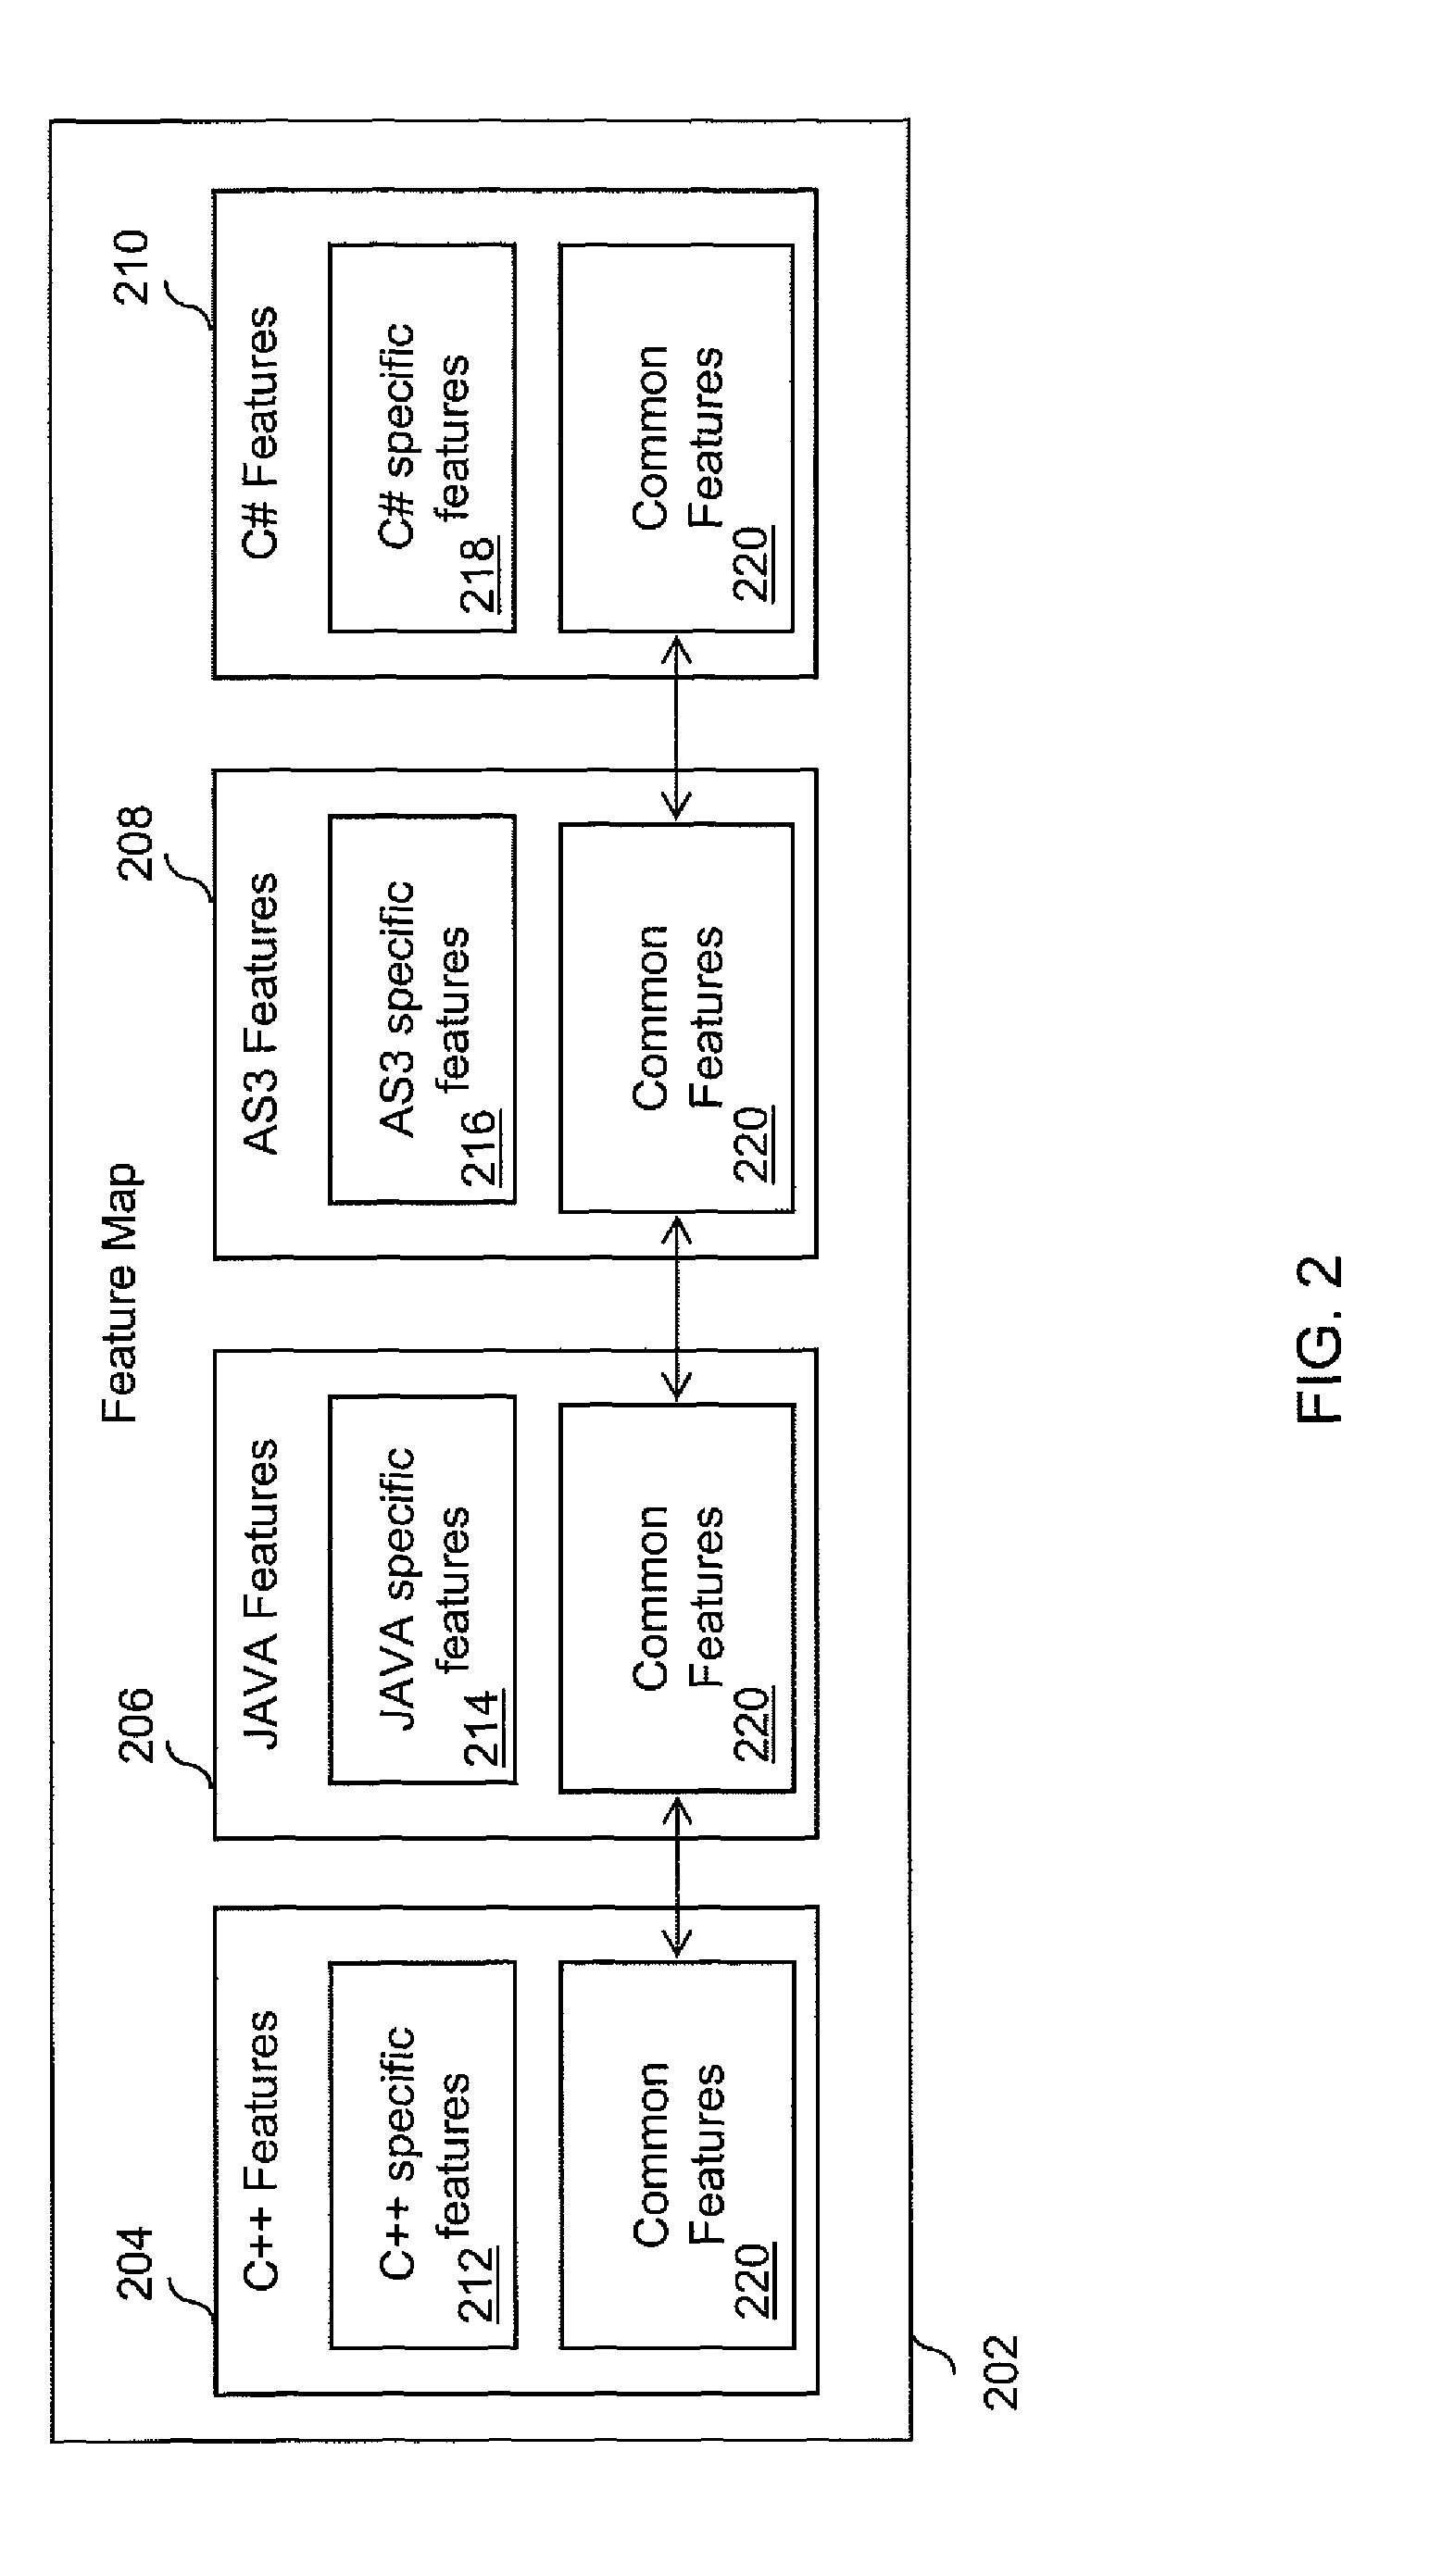 Methods and apparatus for automatic translation of a computer program language code